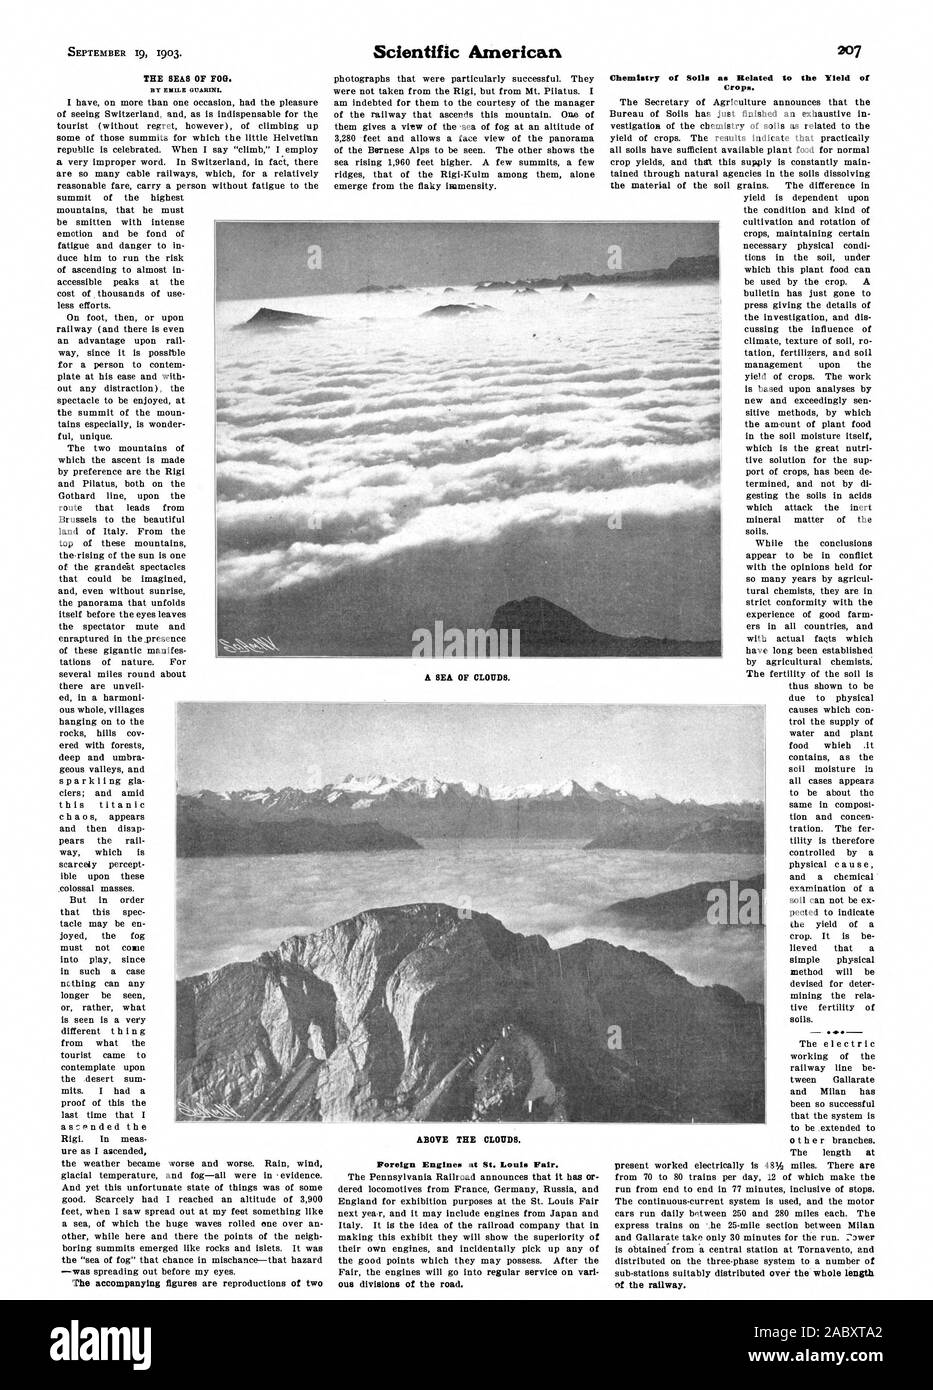 THE SEAS OF FOG. Foreign Engines at St. Louis Fair. ous divisions of the road. Chemistry of Soils as Related to the Yield of Crops. A SEA OF CLOUDS. ABOVE THE CLOUDS., scientific american, 1903-09-19 Stock Photo